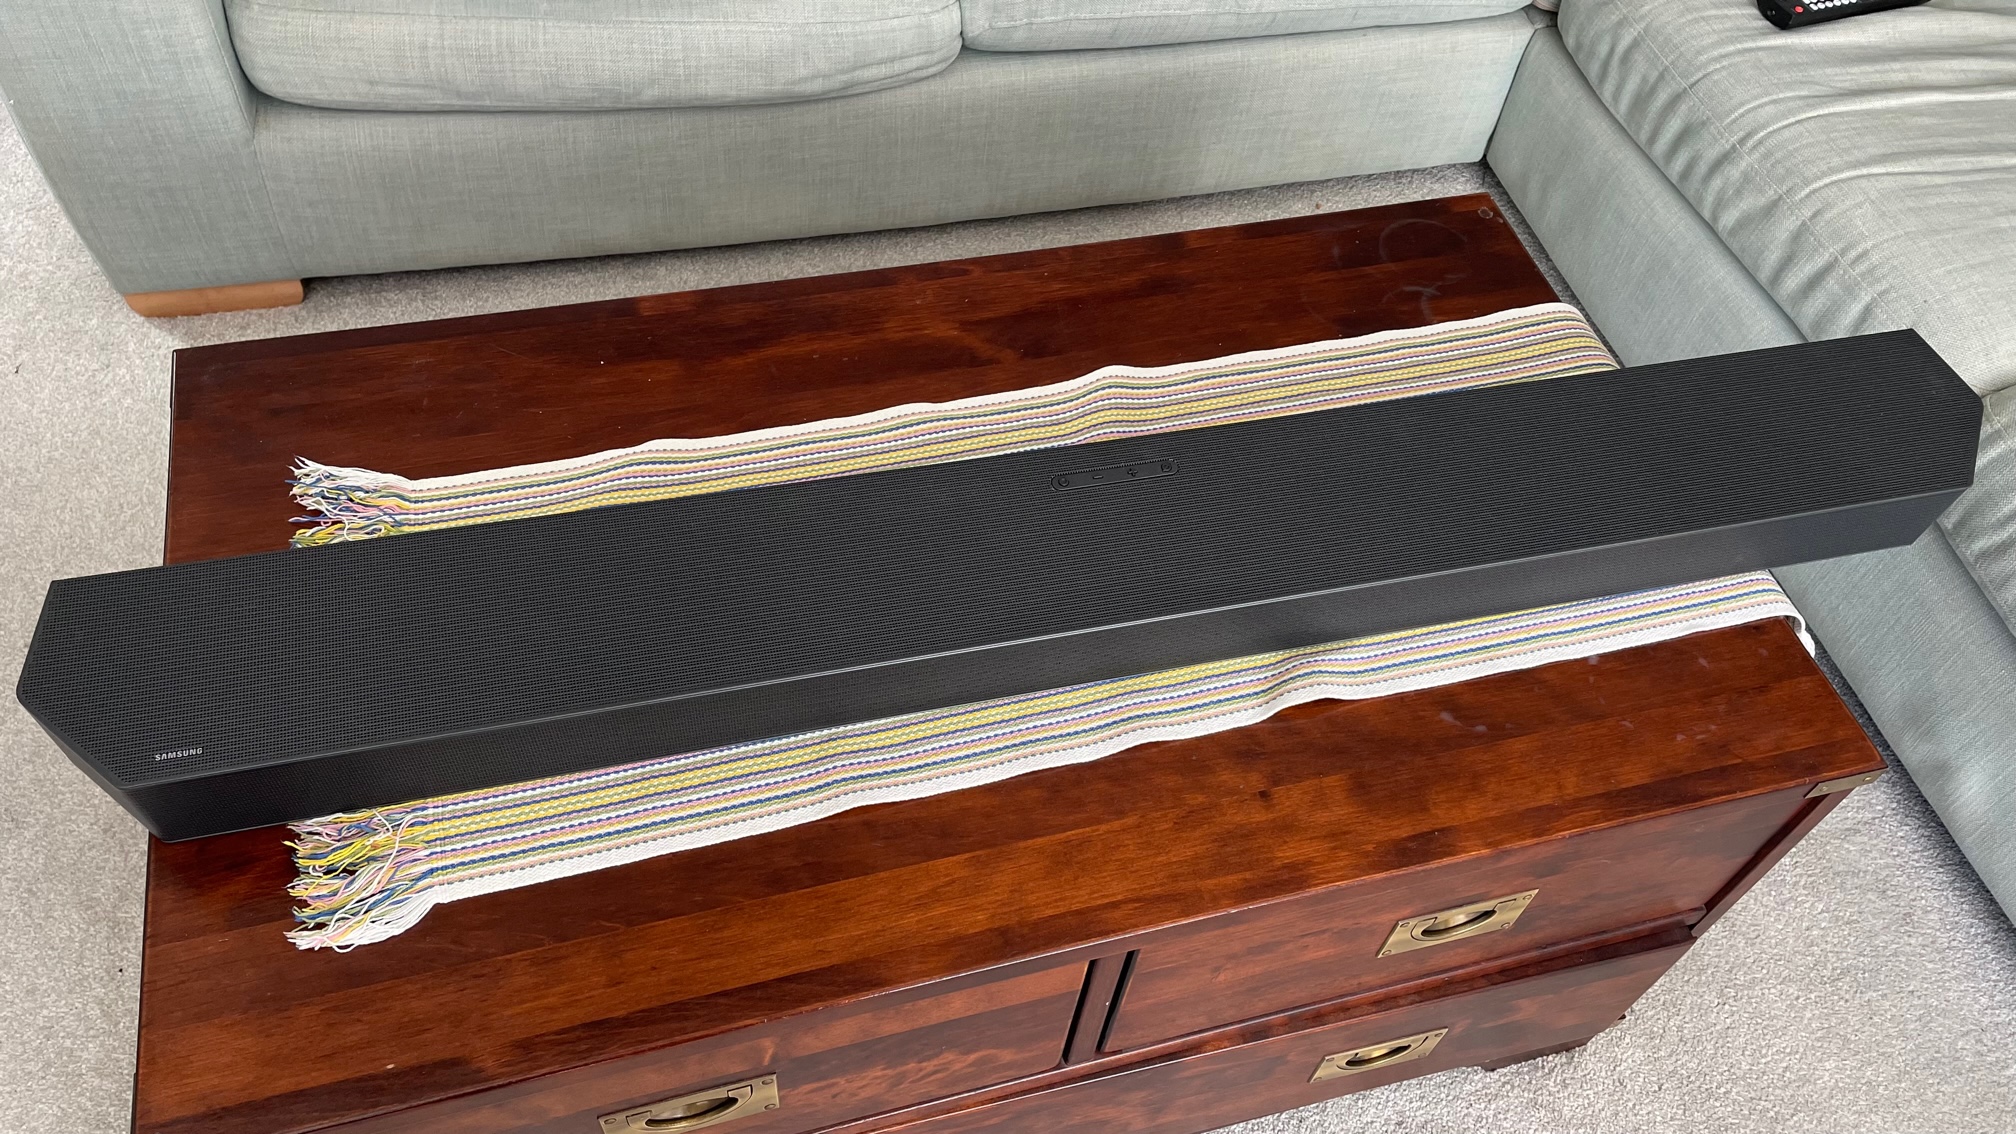 The soundbar part of the Samsung HW-Q990C pictured from above on a wooden table.